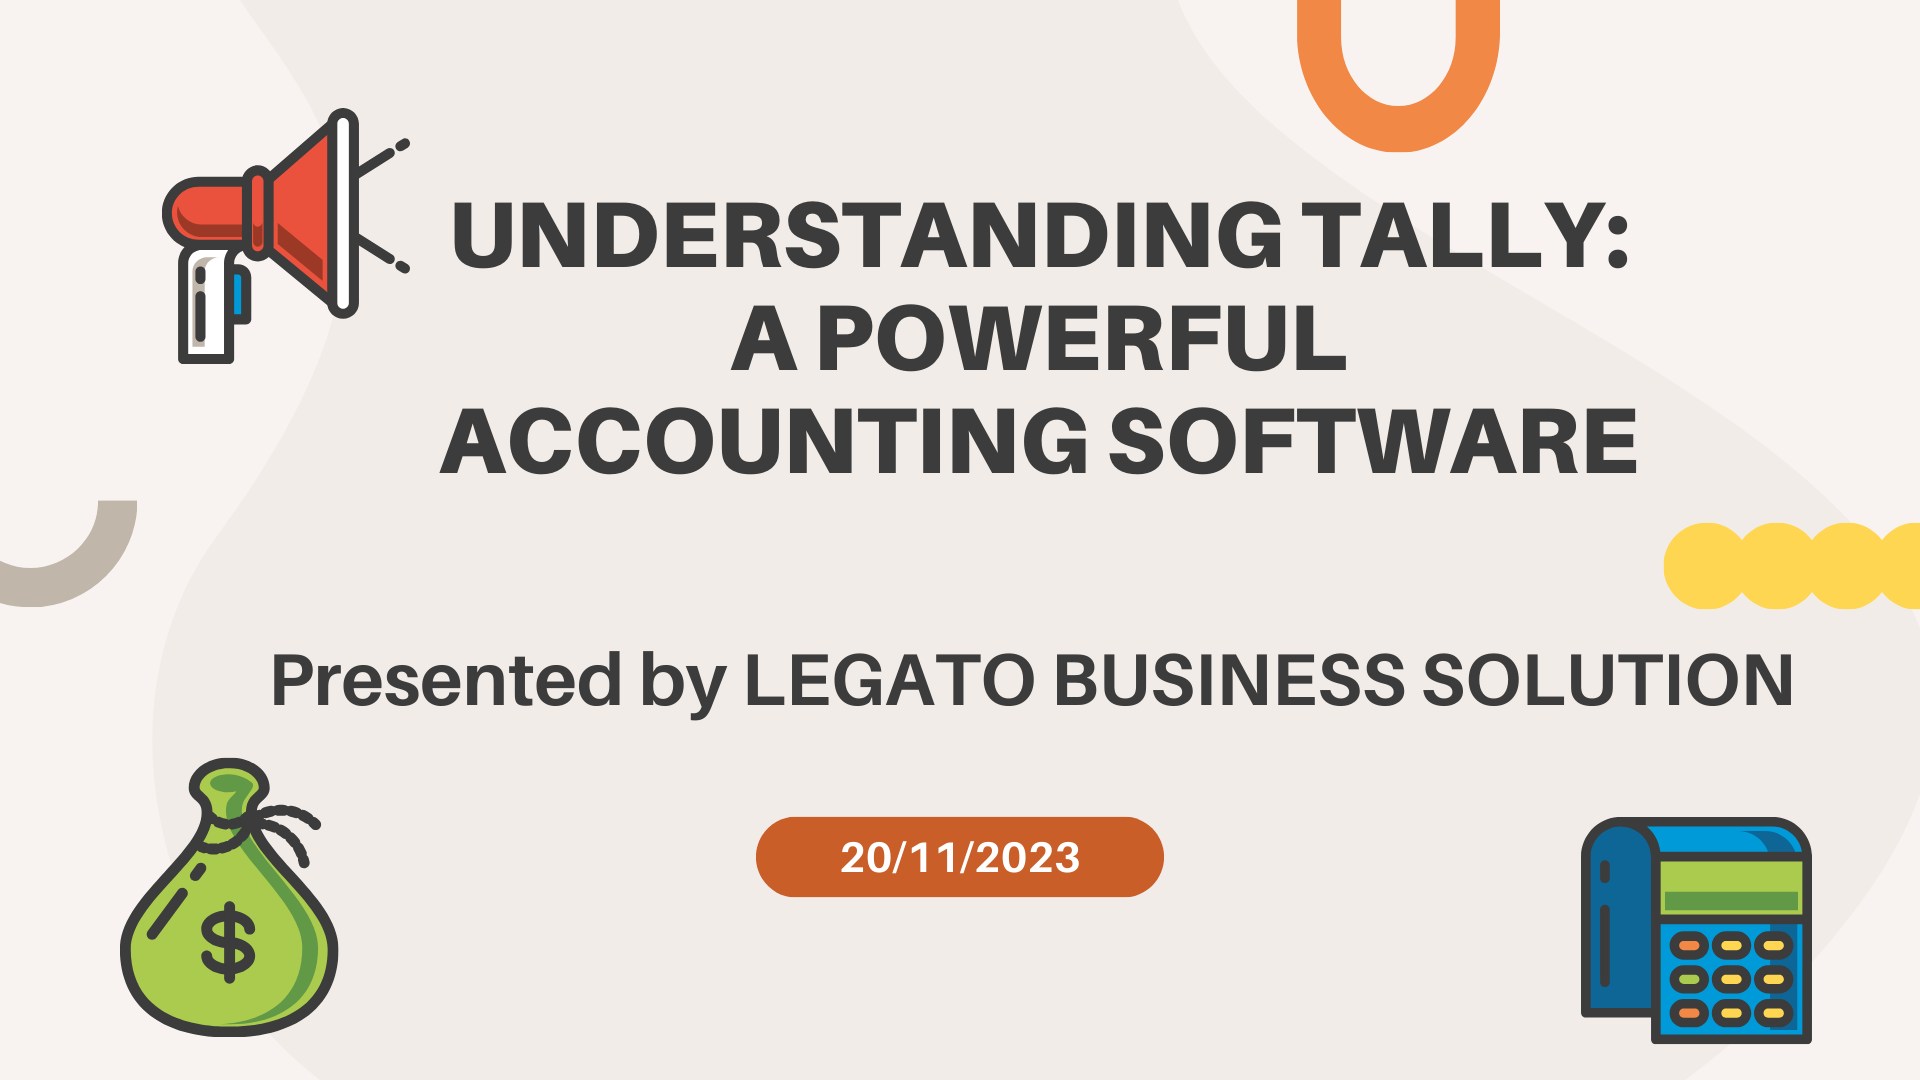 Understanding Tally: A Powerful Accounting Software